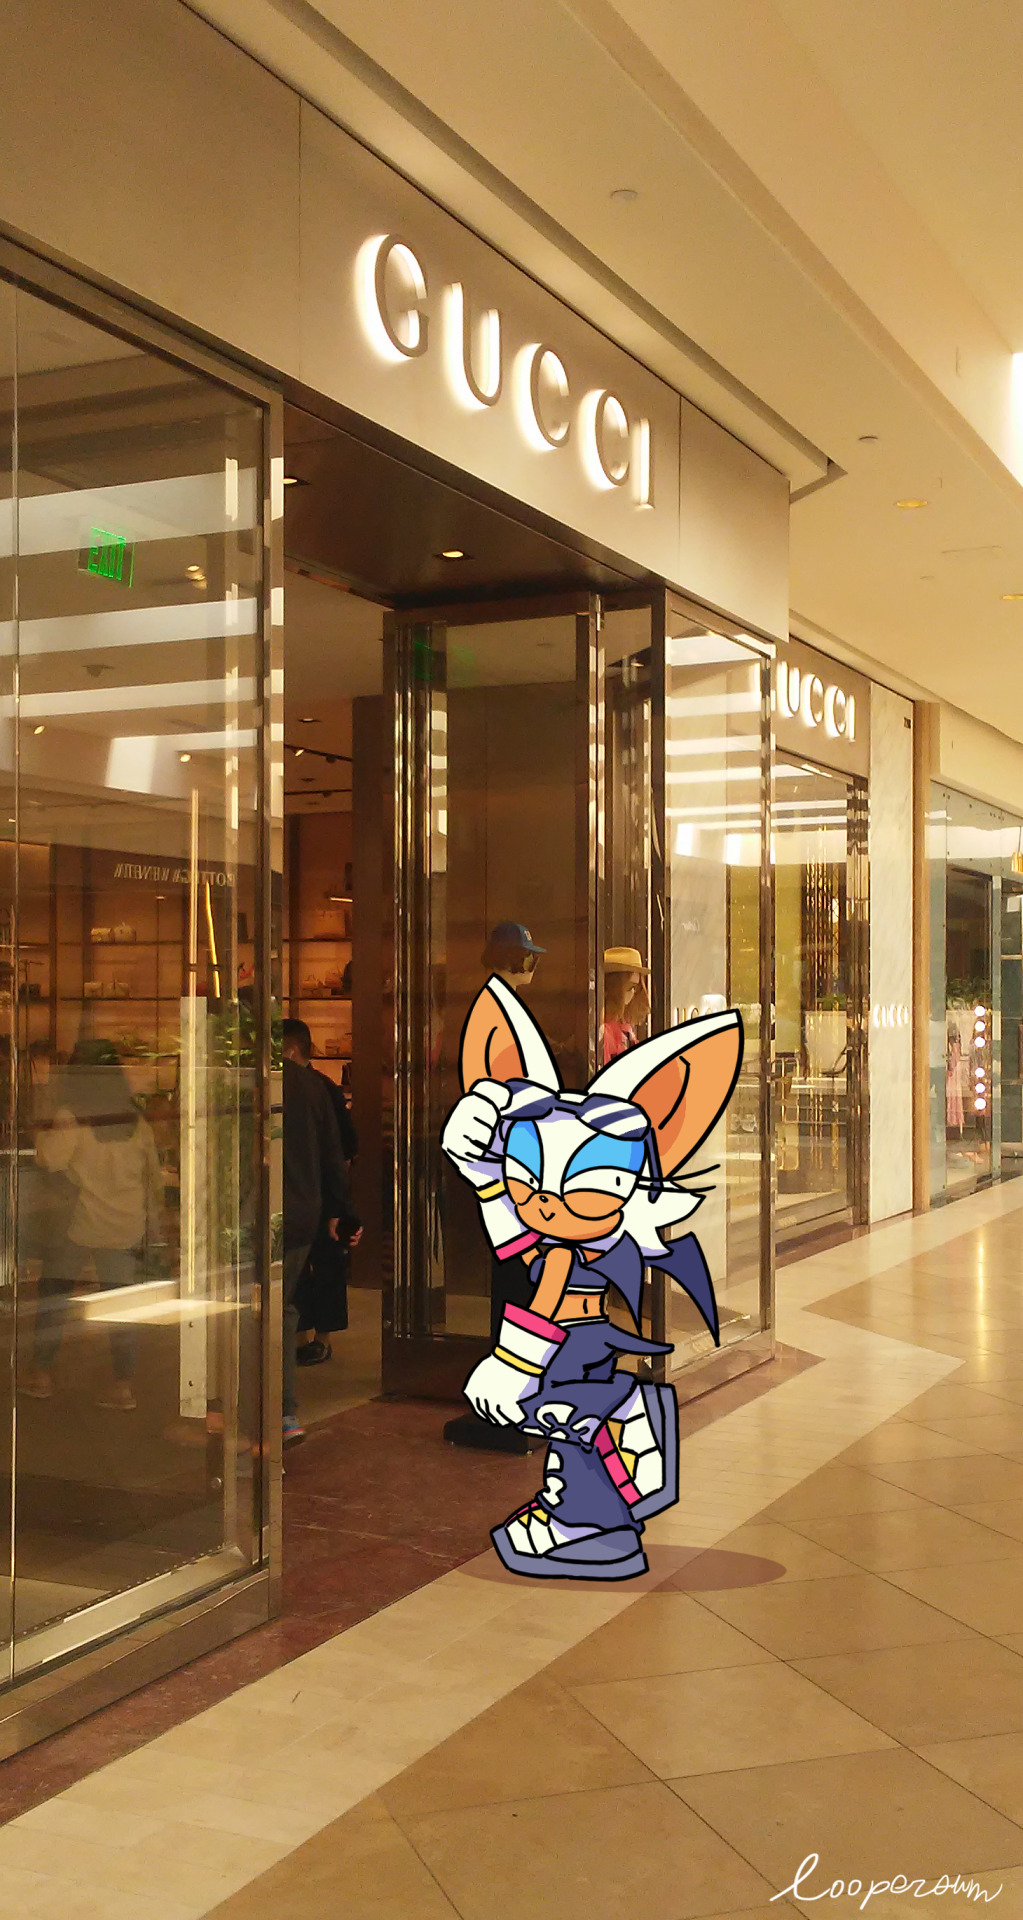 ONCE AGAIN, ROUGE HAS BEEN FORCIBLY REMOVED FROM THE GUCCI STORE #rouge #rouge the bat #sonic #sonic the hedgehog #meme#gucci